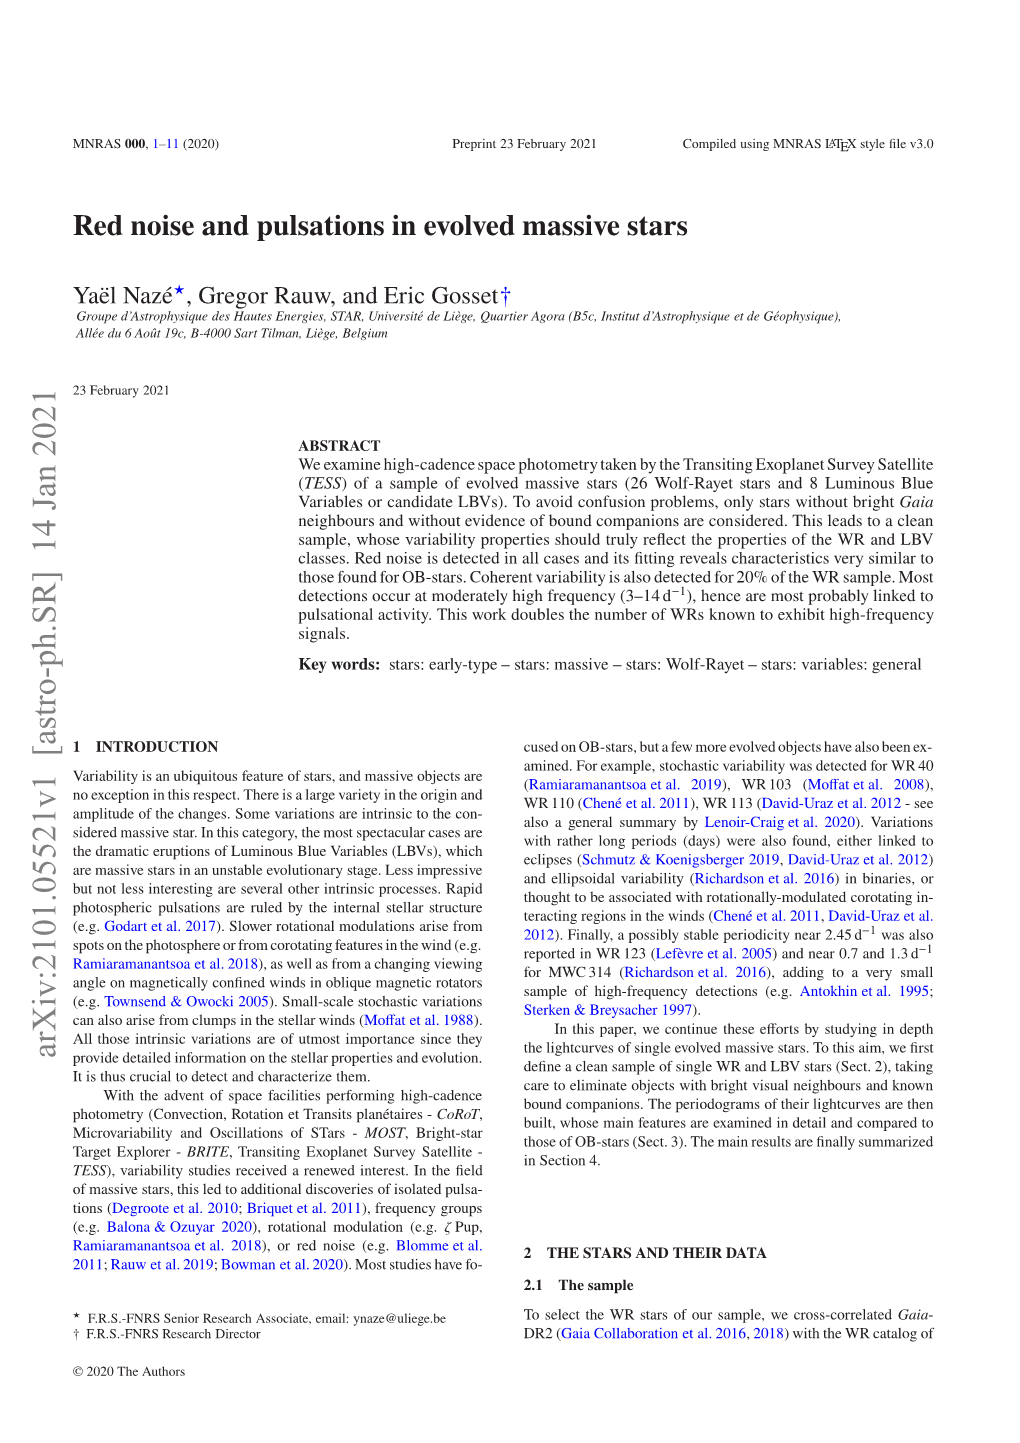 Red Noise and Pulsations in Evolved Massive Stars